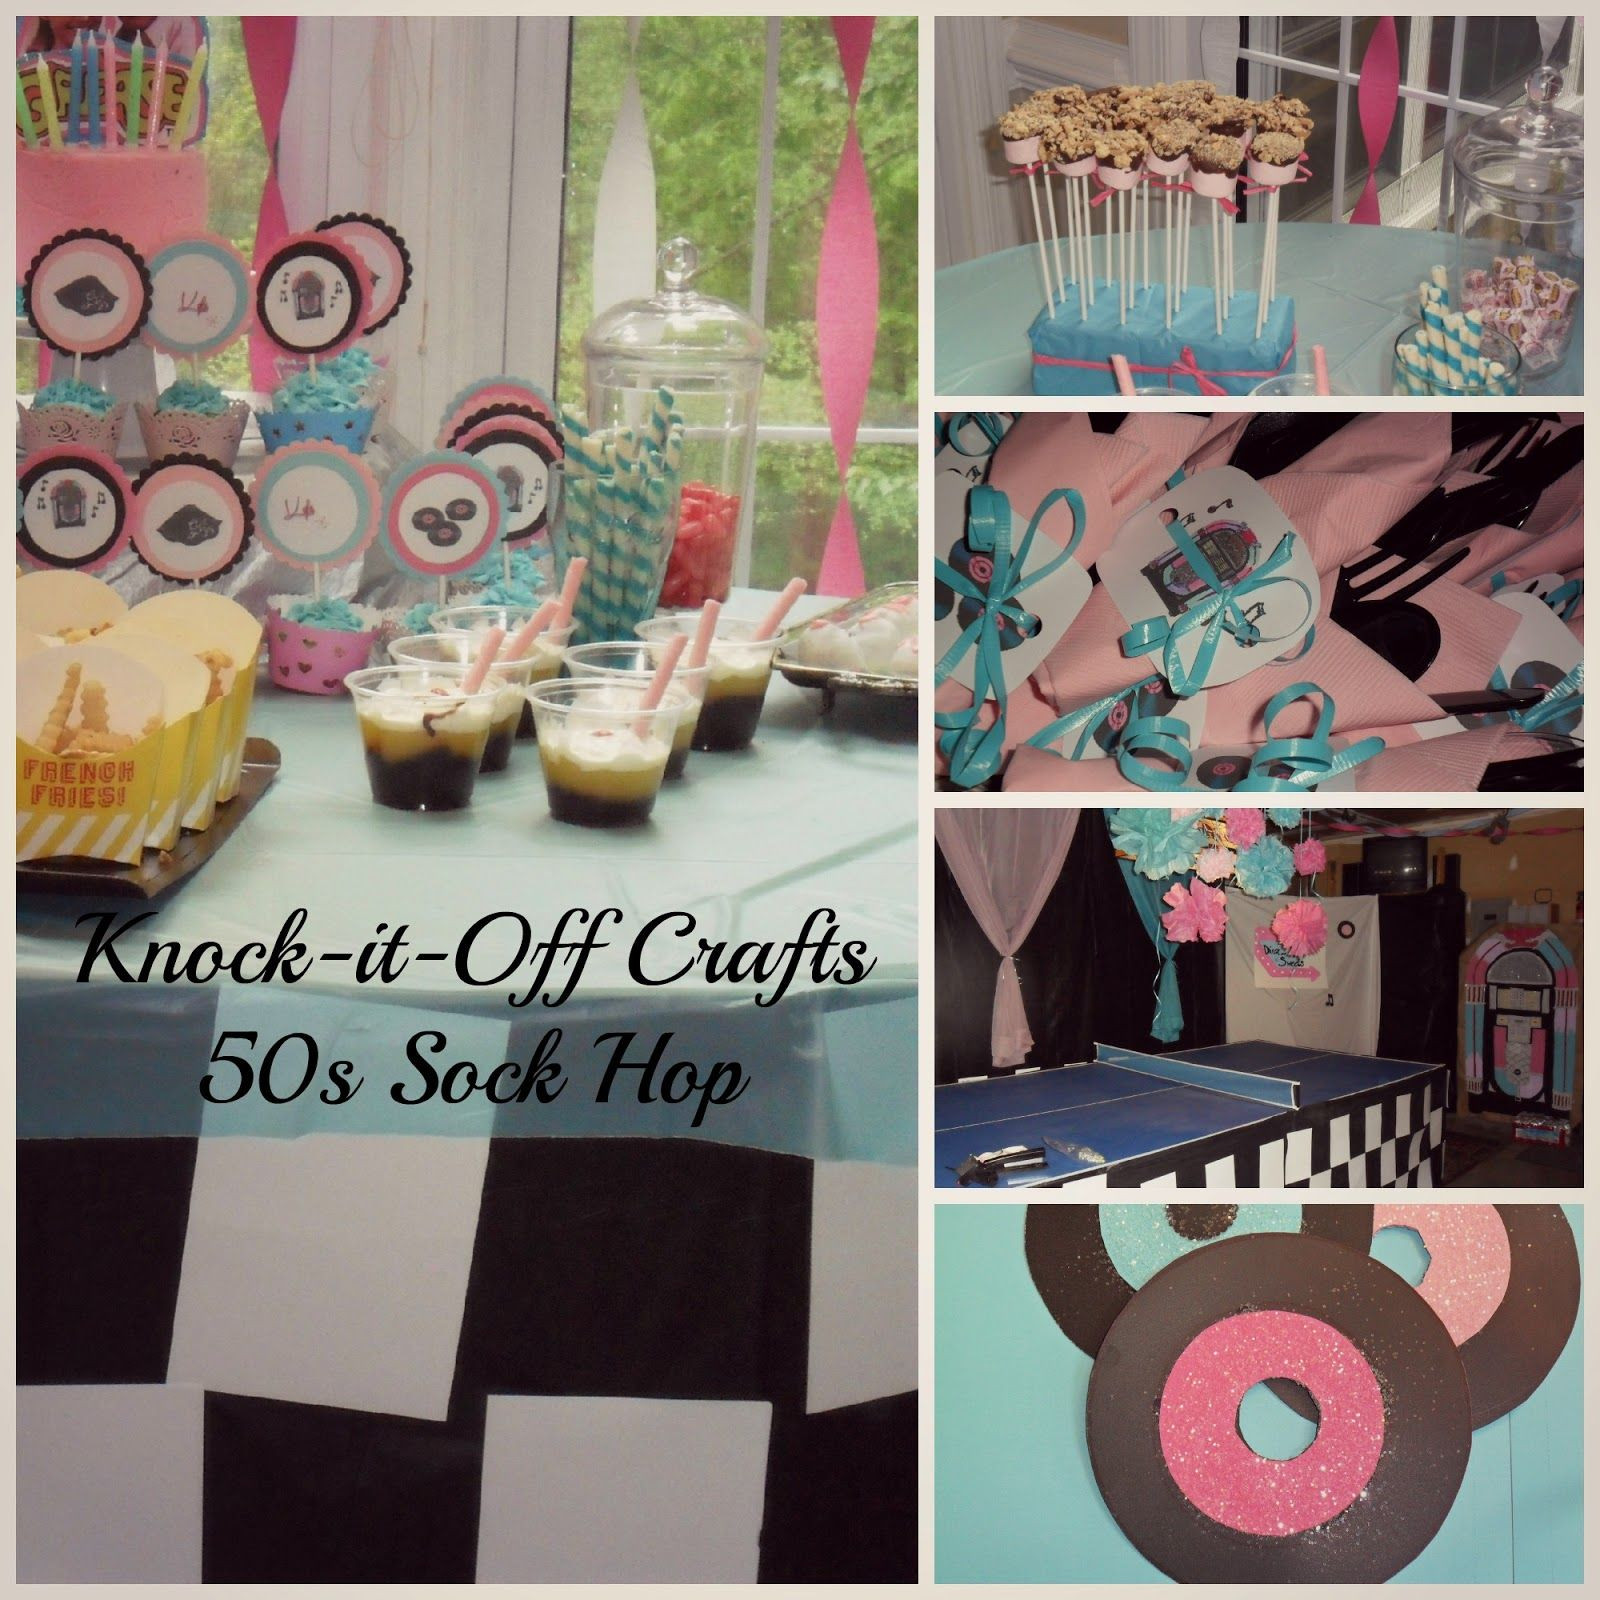 Sock Hop Decorations DIY
 How to Host a Fabulous 50s Themed Party for Cheap